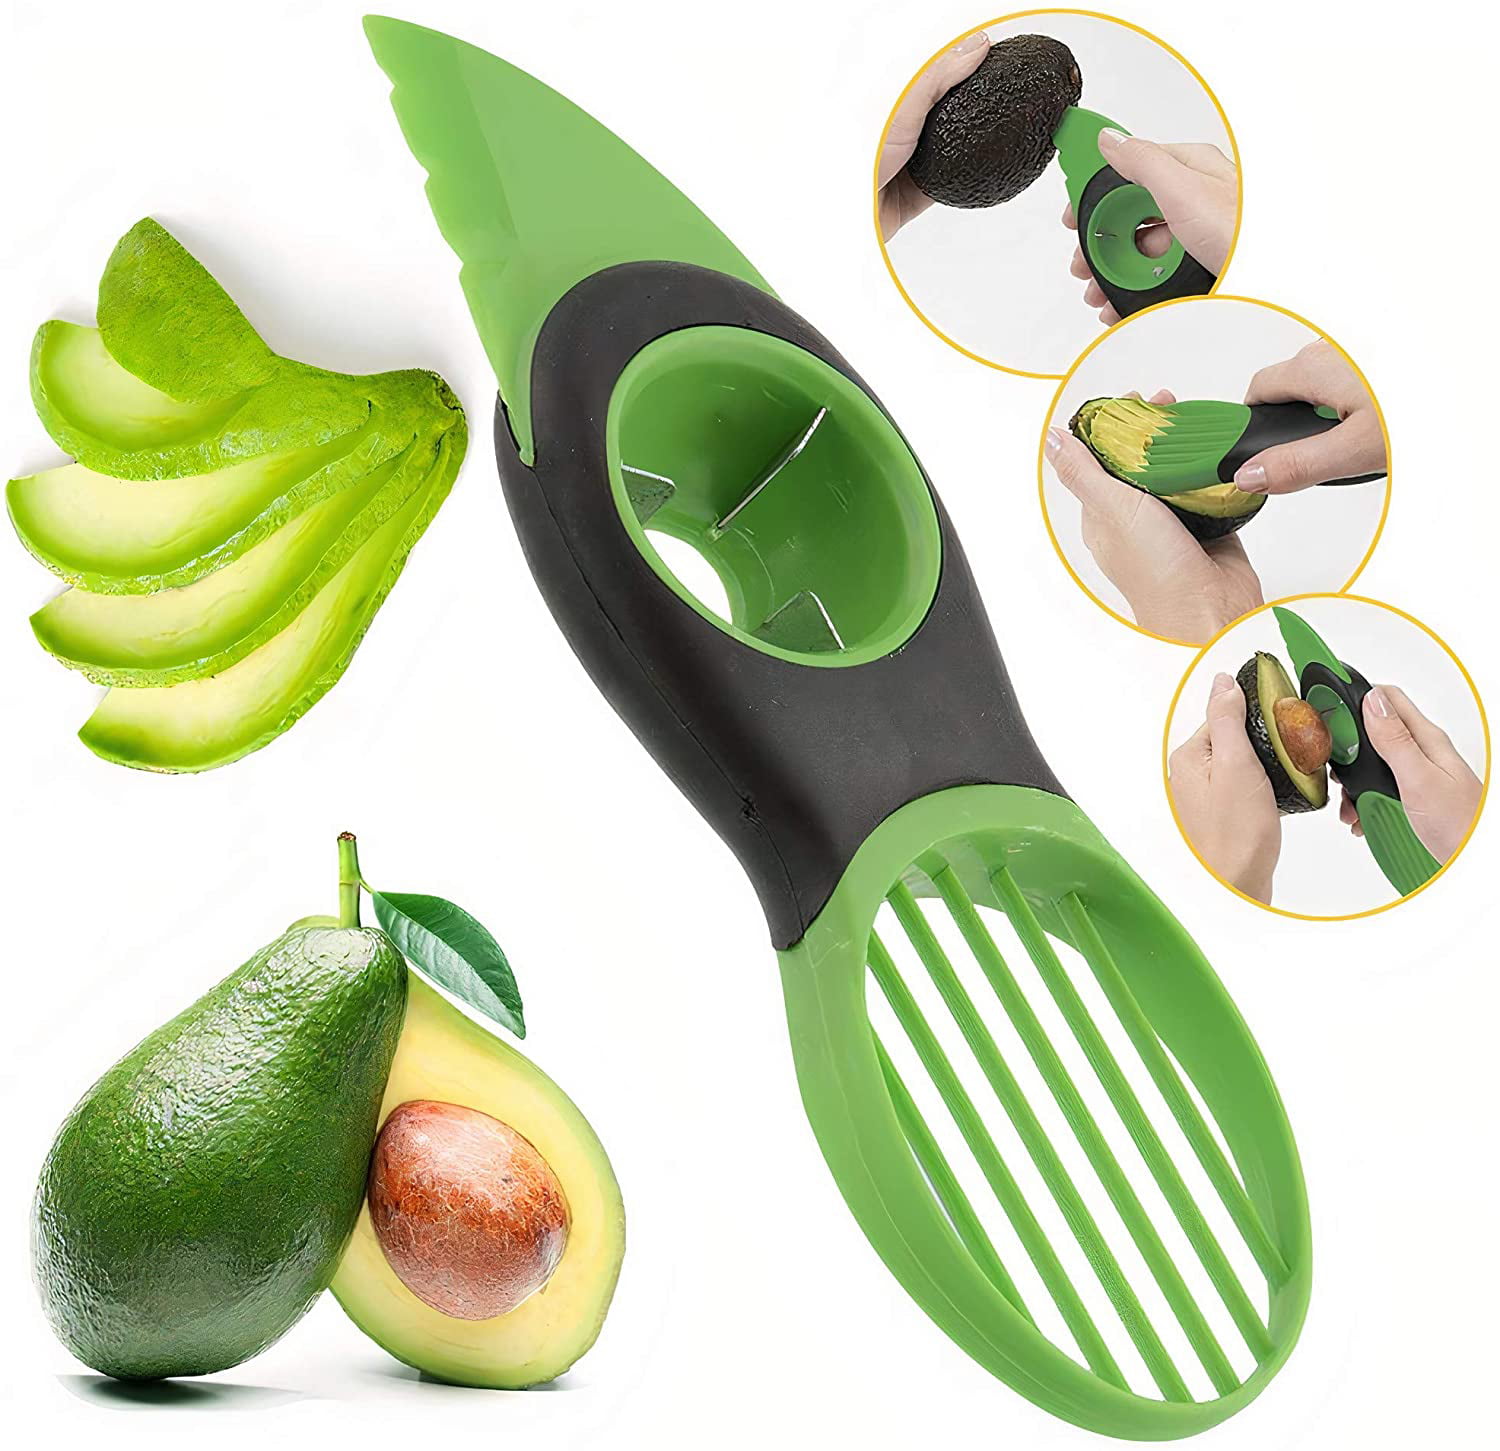 Hulless Practical 3 In 1 Avocado Slicer,Avocado Cutter,Avocado Masher Fruit Splitter Nuclear Remove Tool Double Sided Apple Nuclear Remover. Green black 